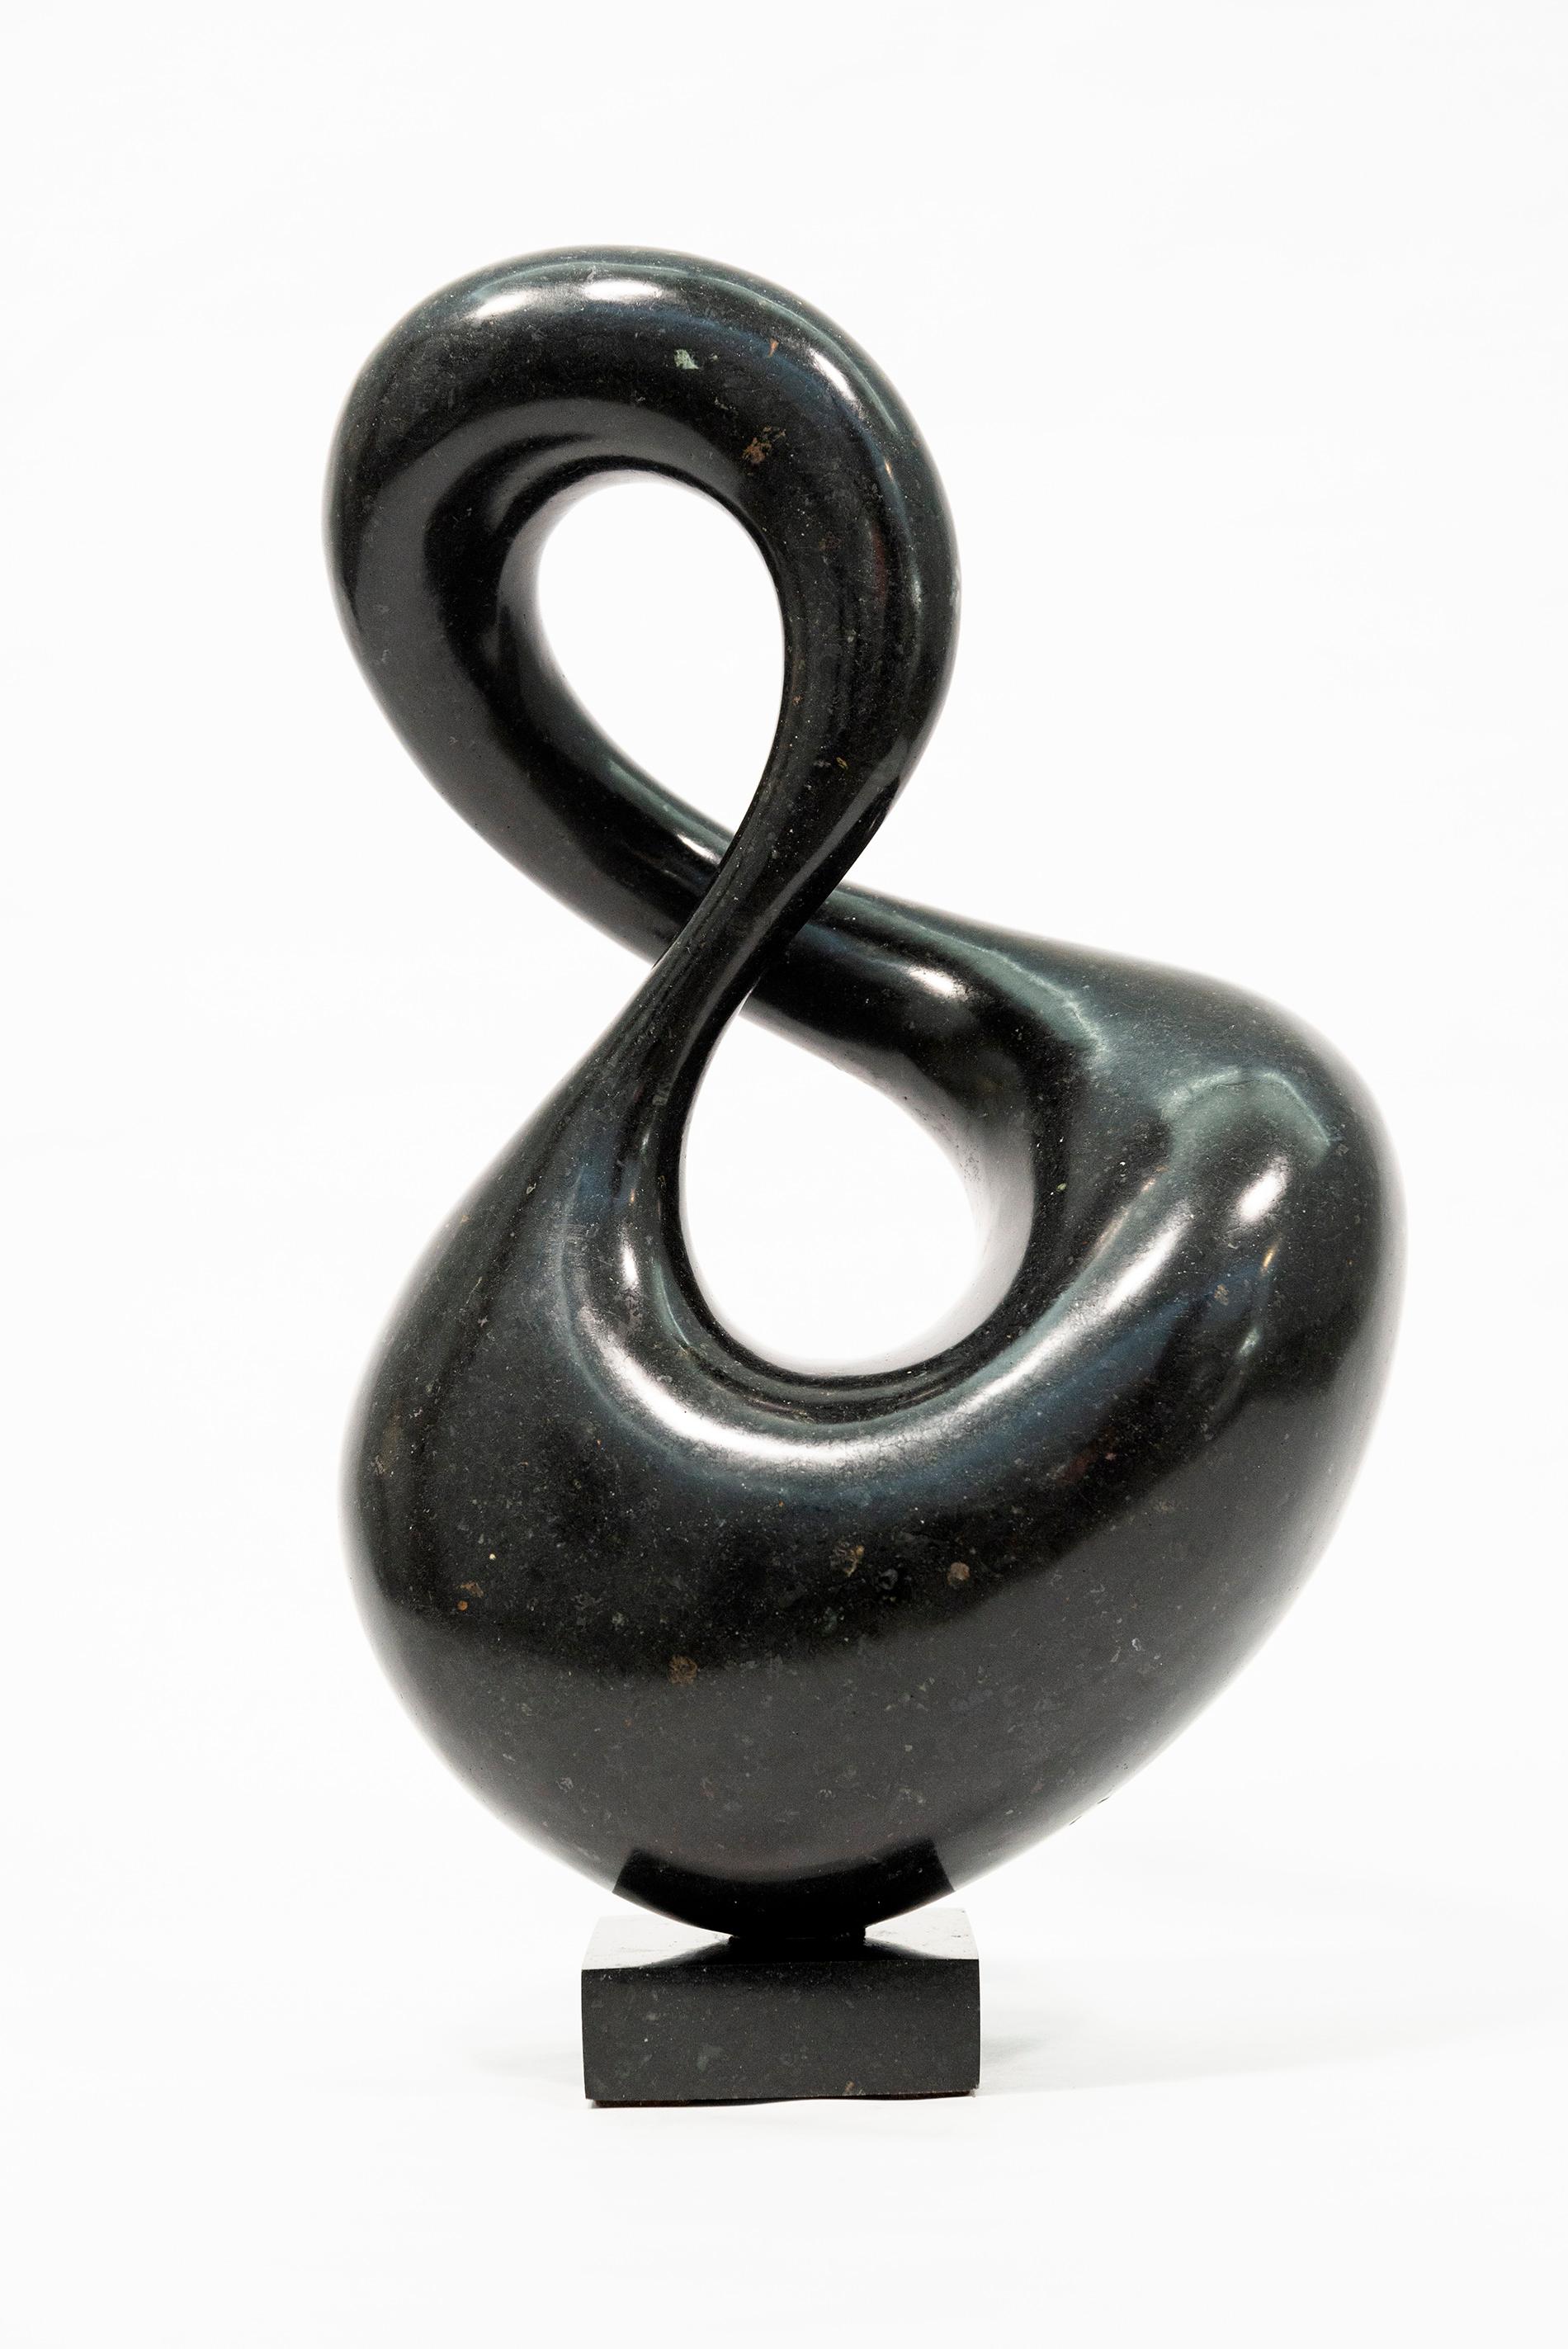 Jeremy Guy Abstract Sculpture - Event 3/50 - dark, smooth, polished, abstract, black granite sculpture